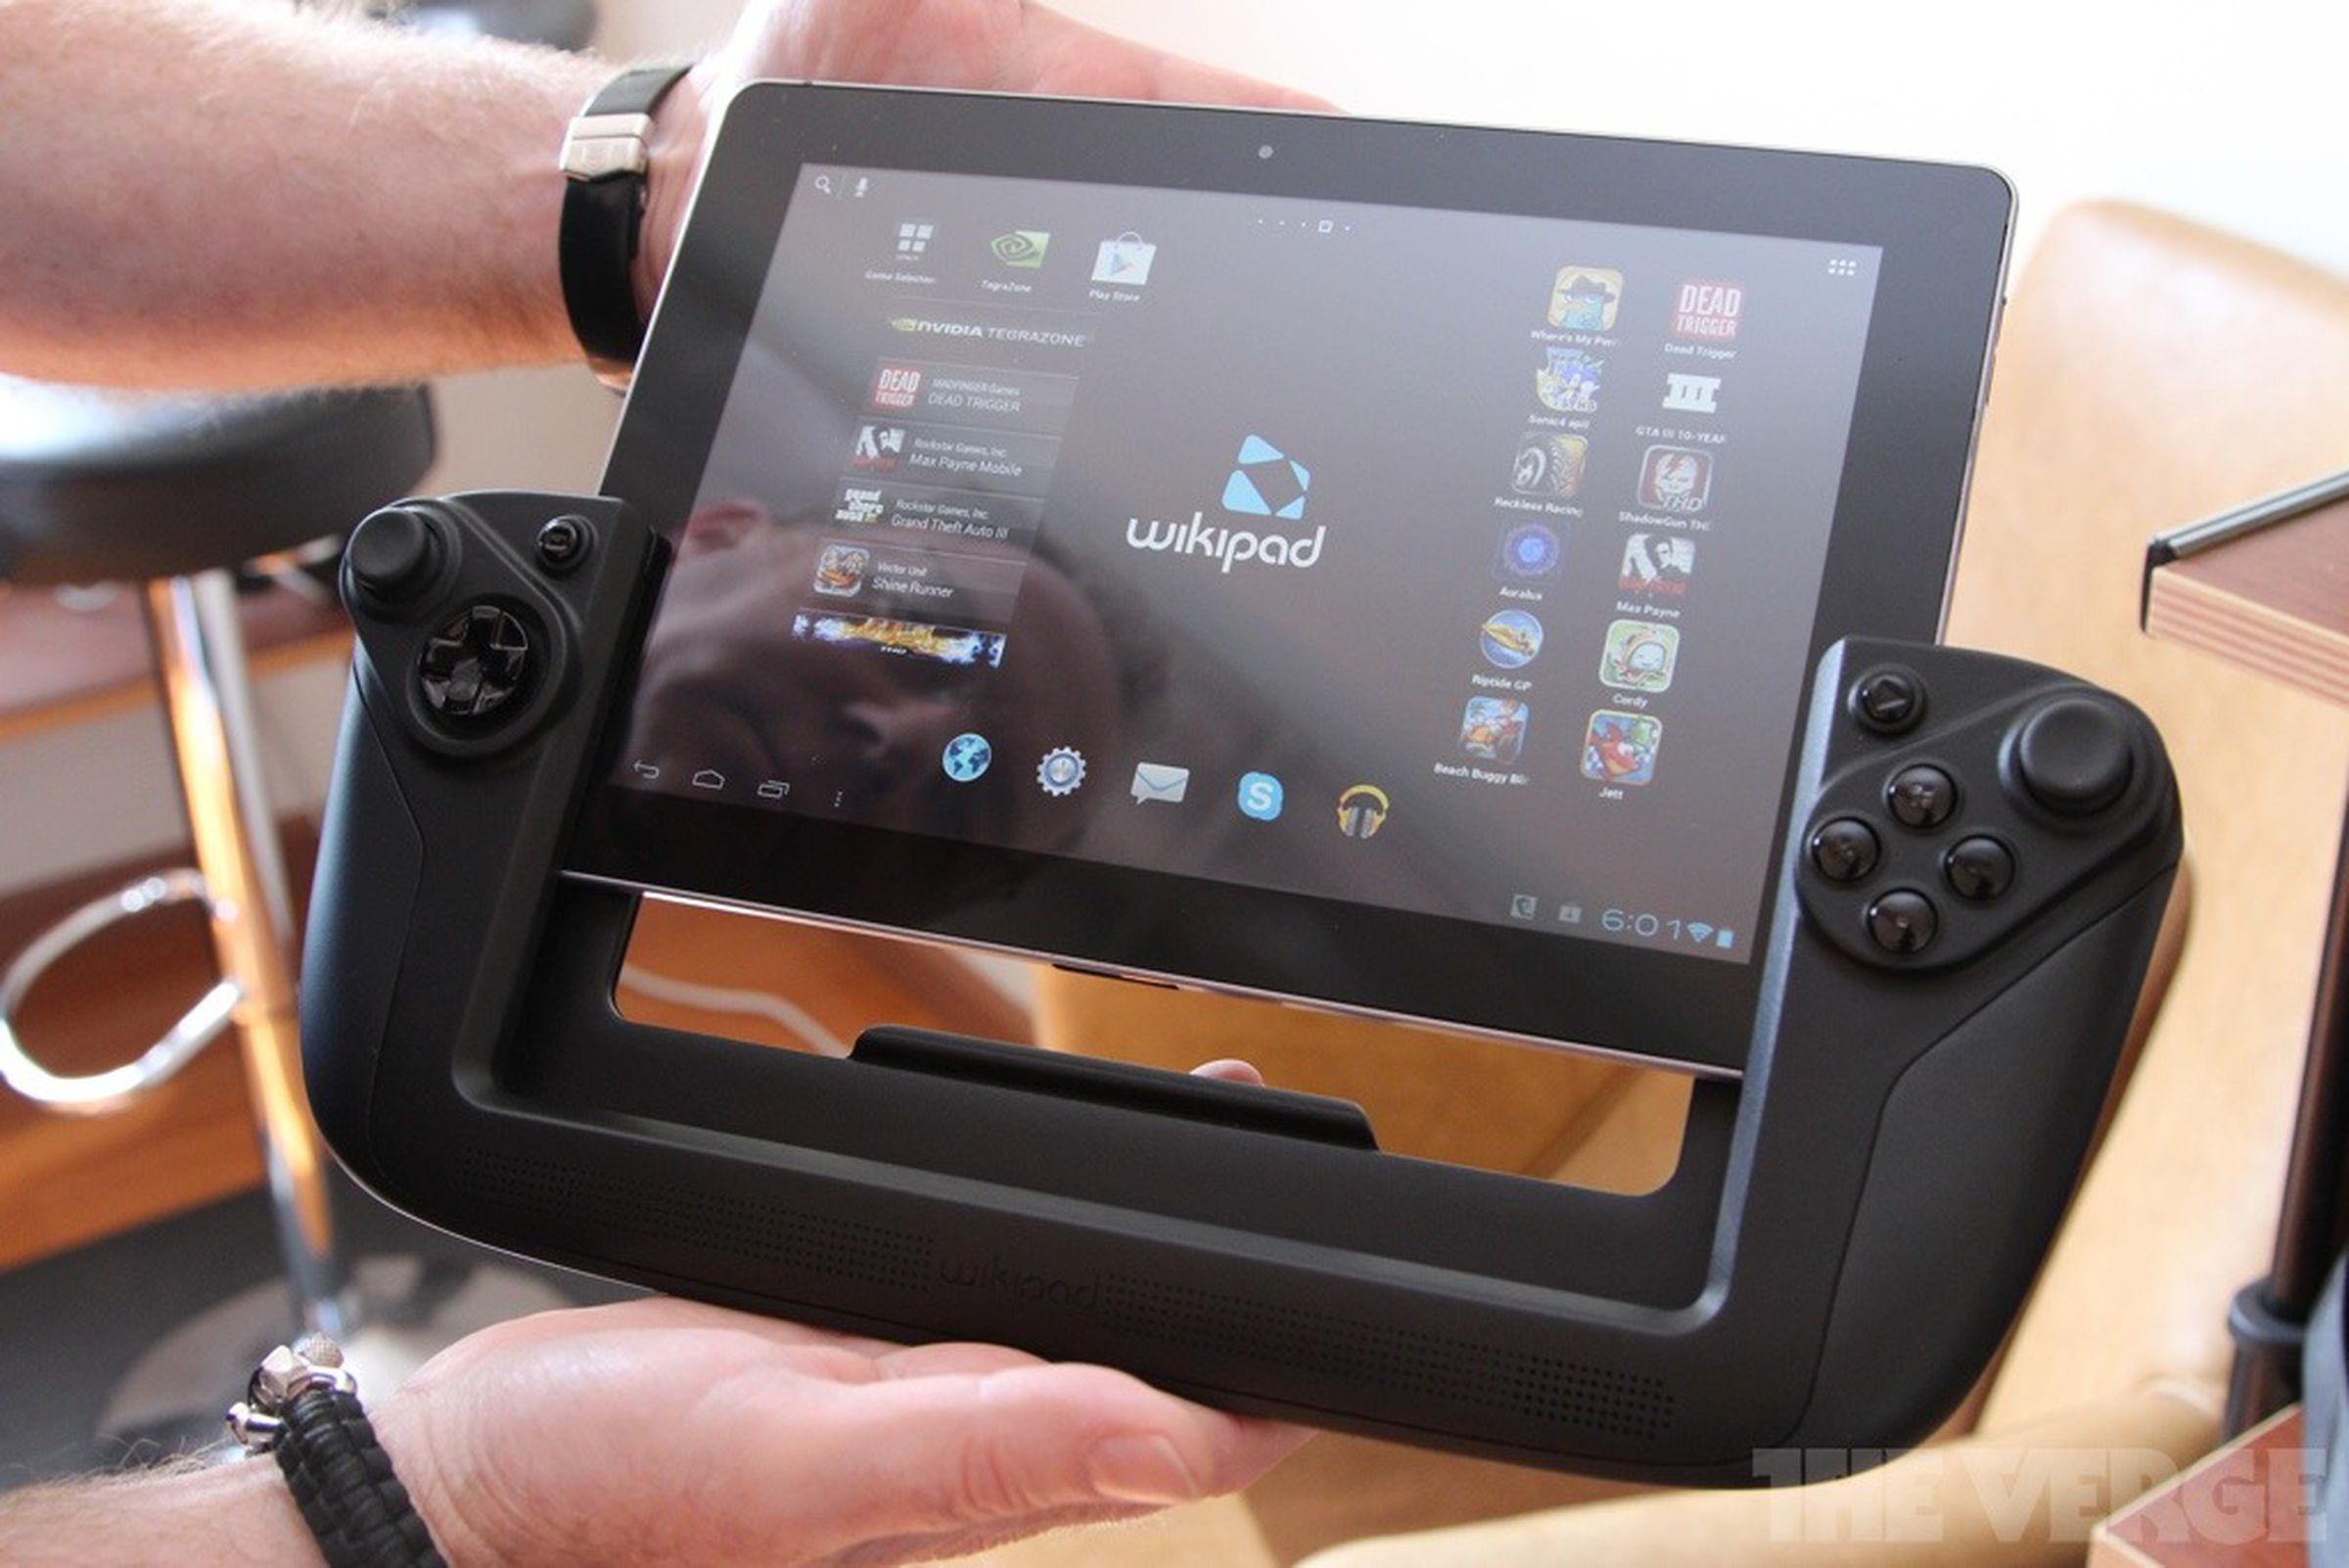 Wikipad gaming tablet hands-on pictures